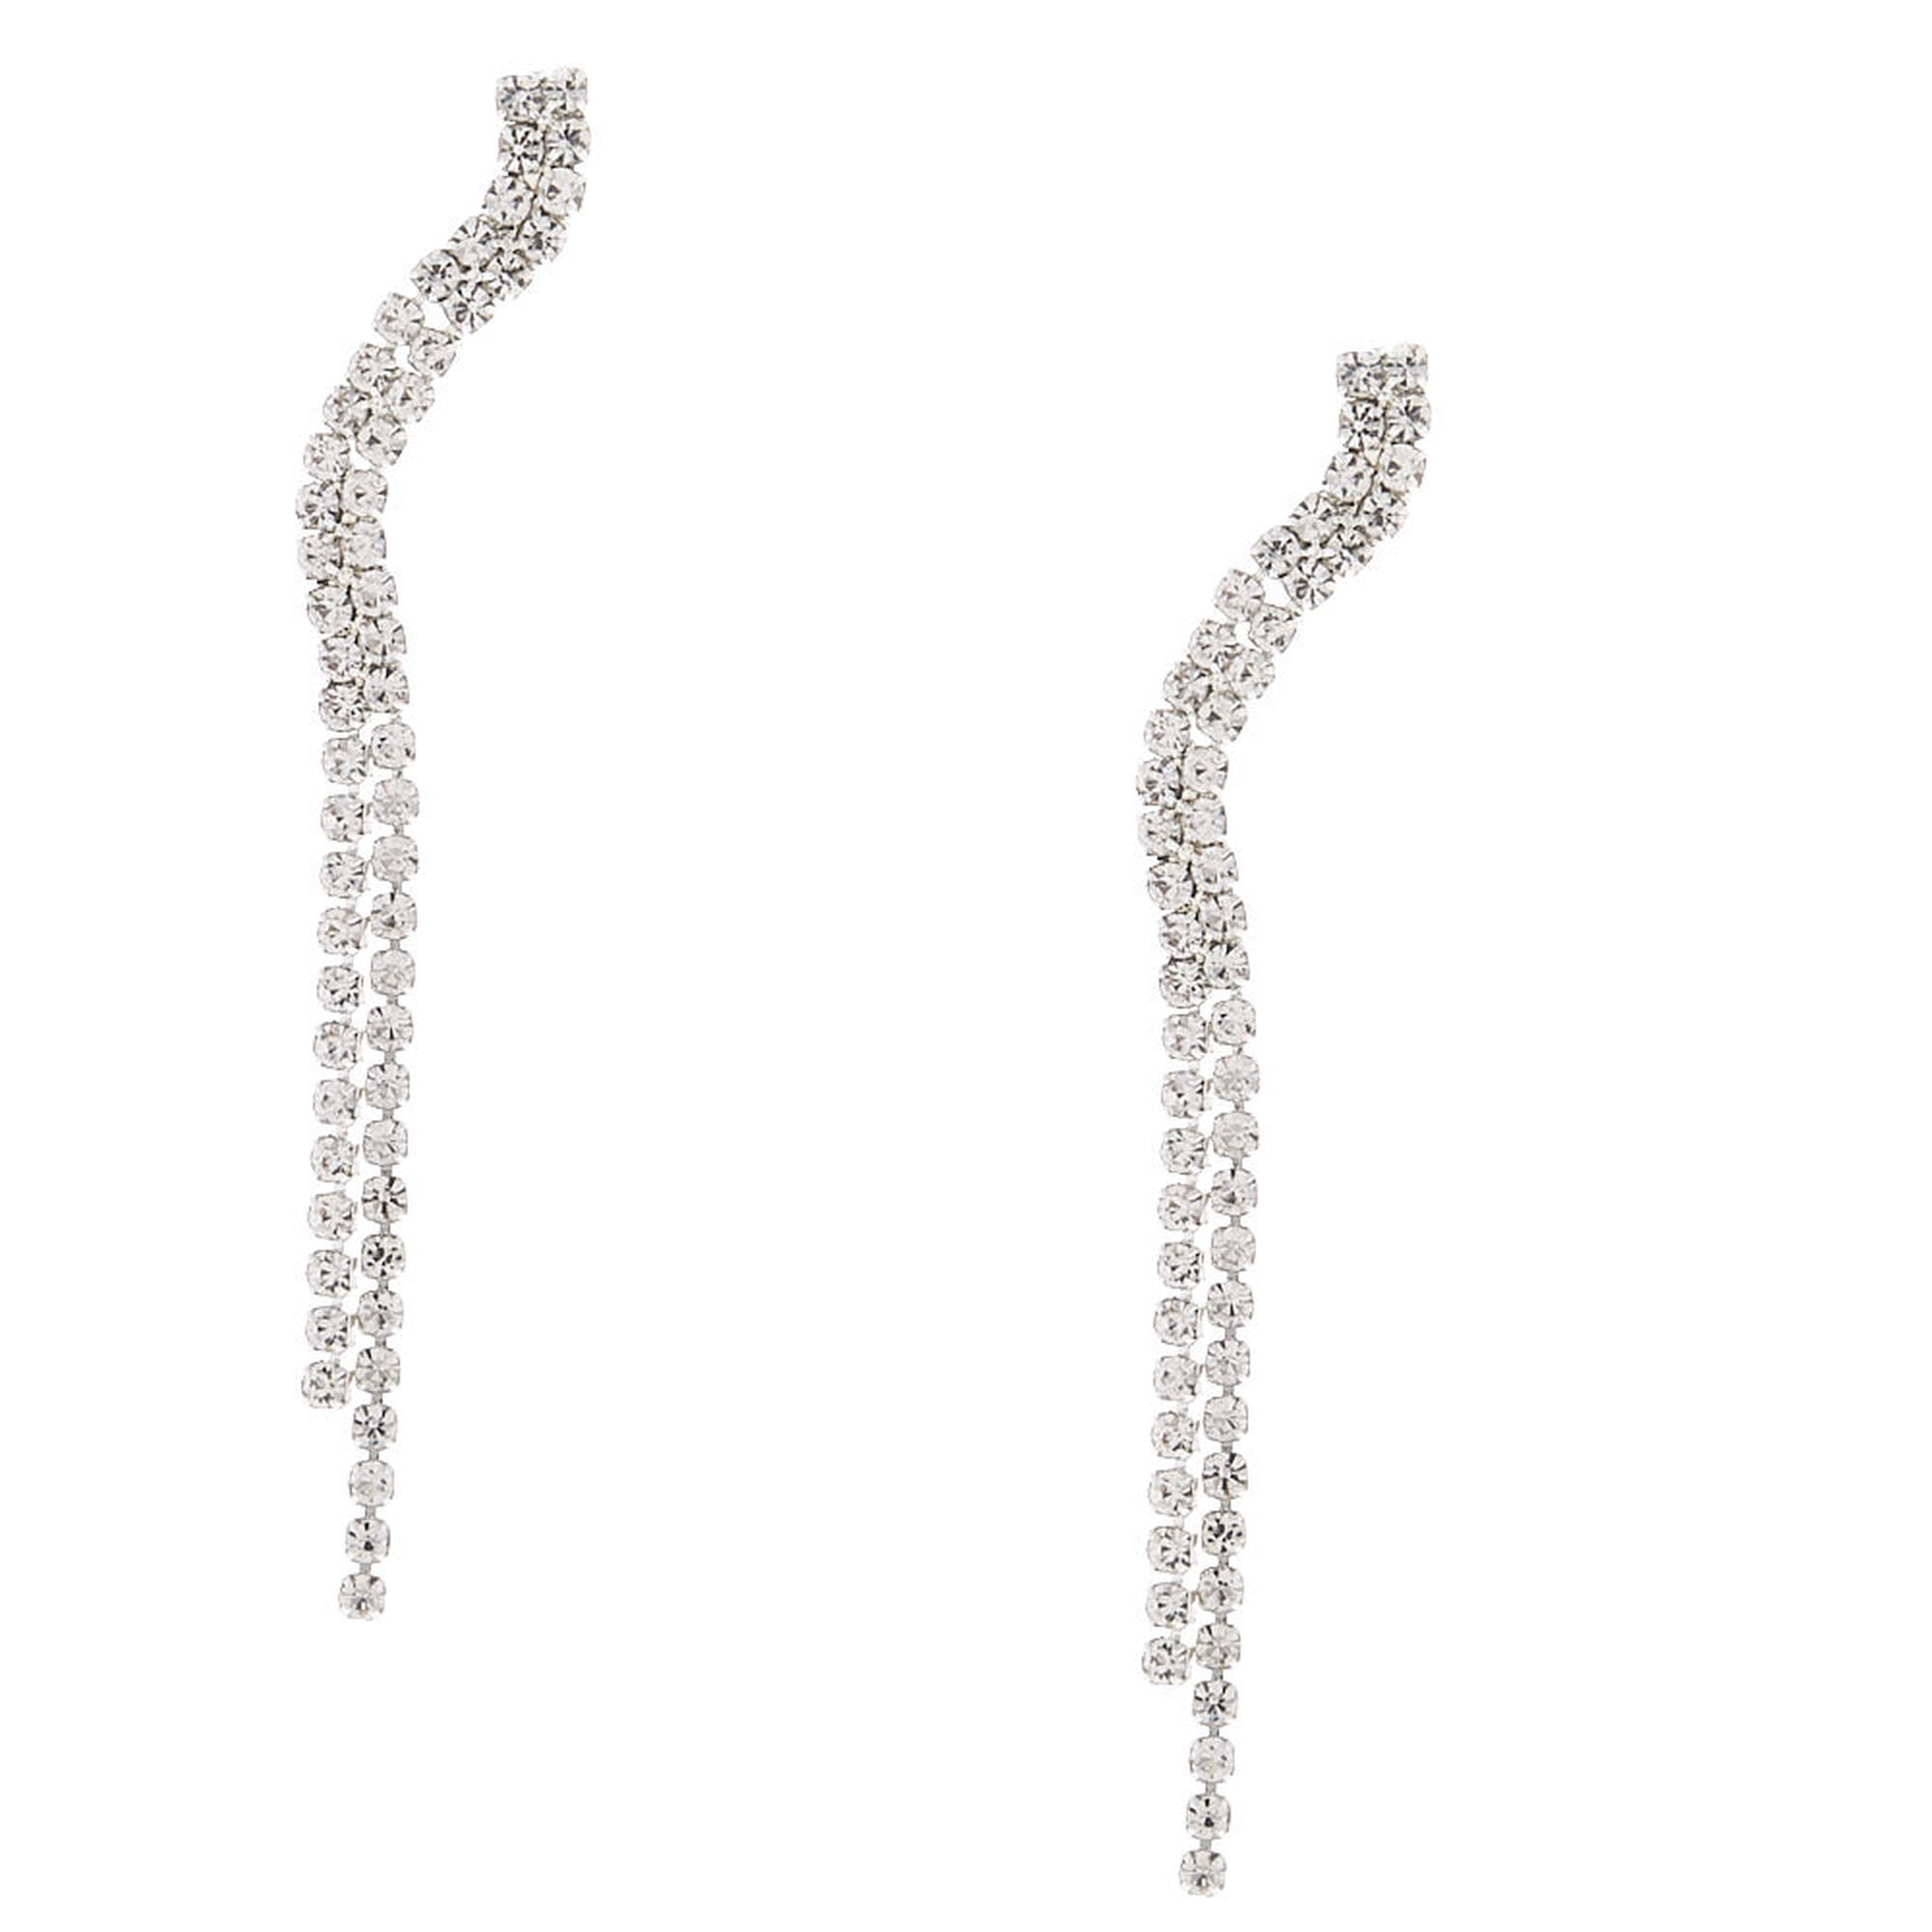 View Claires Tone Rhinestone 25 Snake Drop Earrings Silver information